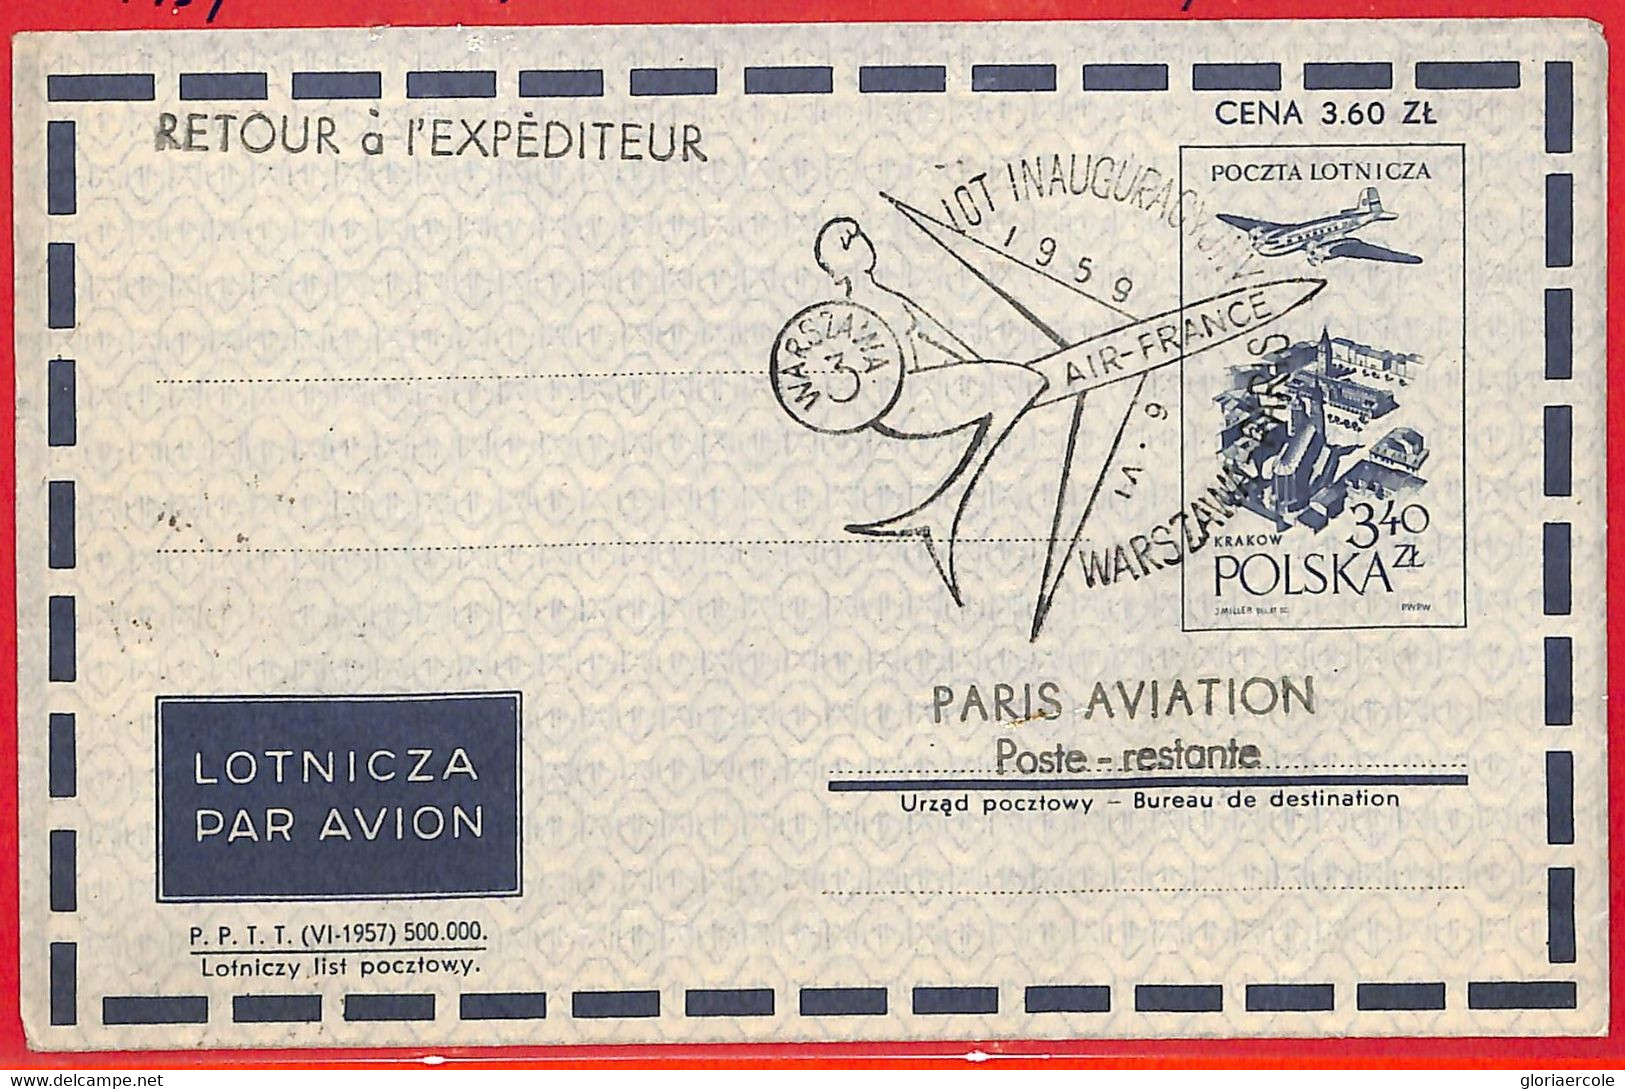 Aa3414 - POLONIA - Postal History - FIRST FLIGHT Cover WARSAW - PARIS  1959 - Airplanes